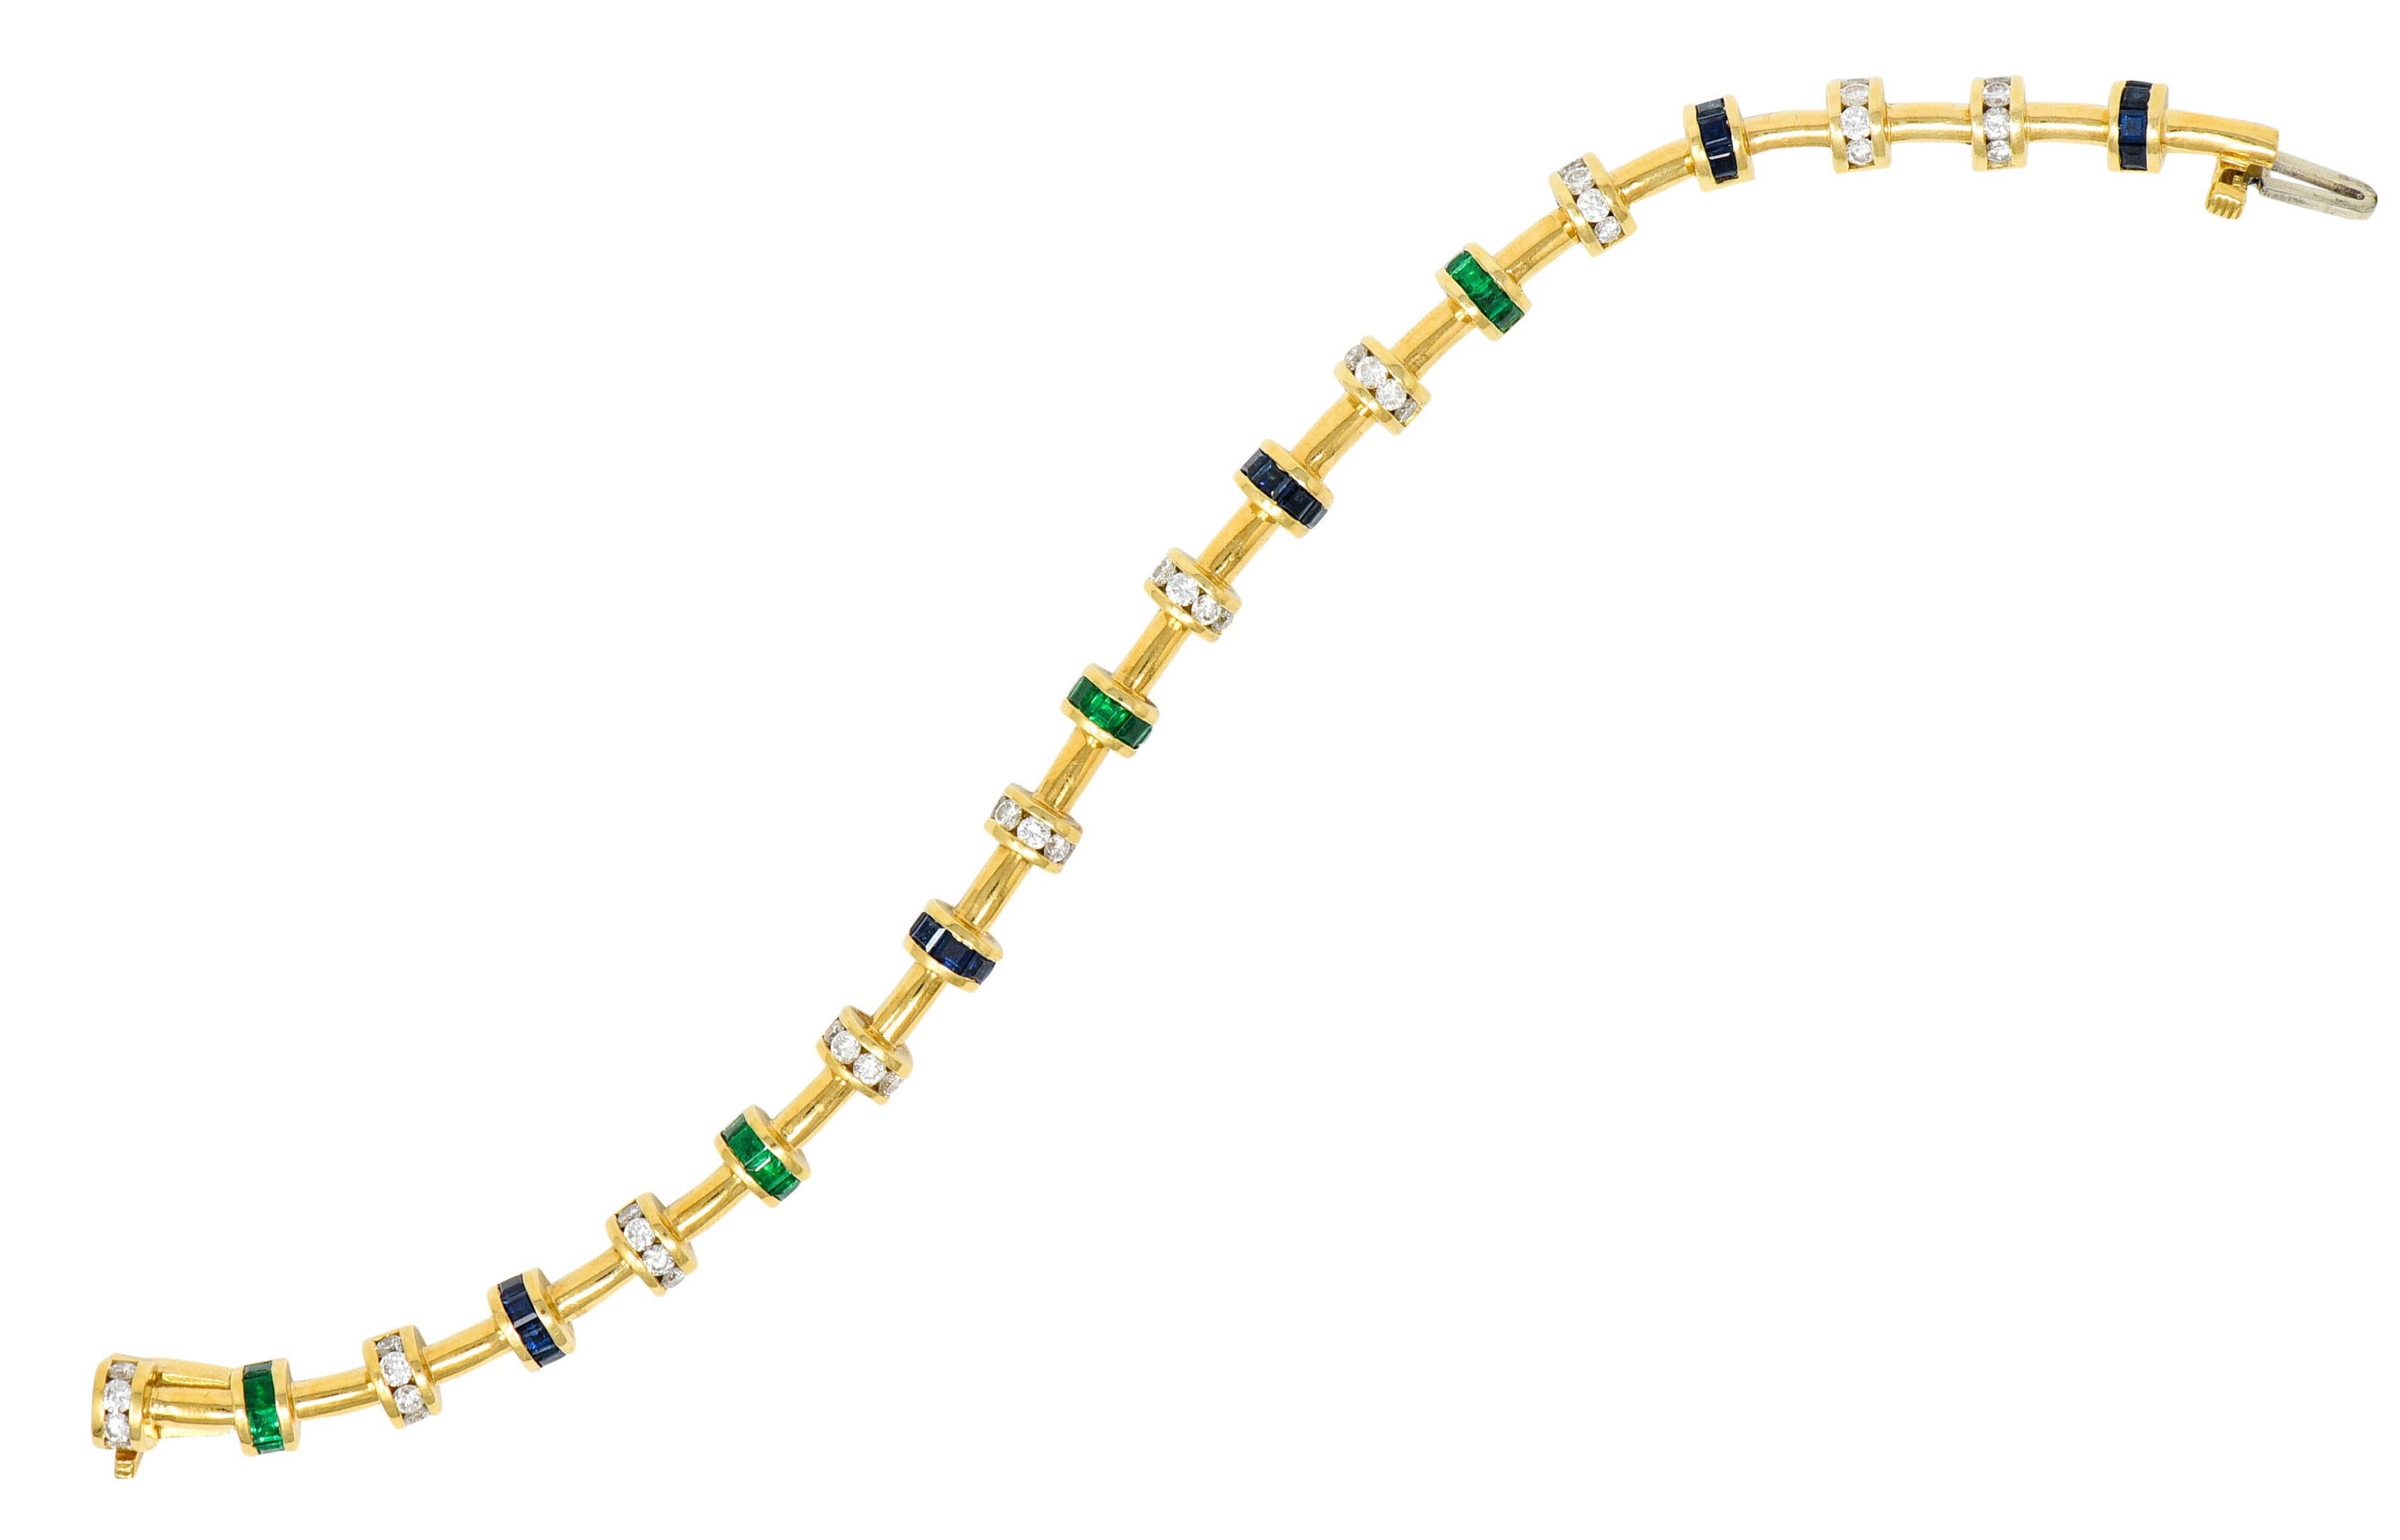 Bracelet is comprised of smooth bar links alternating with gemmed barrel links

Featuring round brilliant cut diamonds weighing in total approximately 1.50 - G/H color with VS clarity

Square cut emeralds weighing in total approximately 1.50 carat -